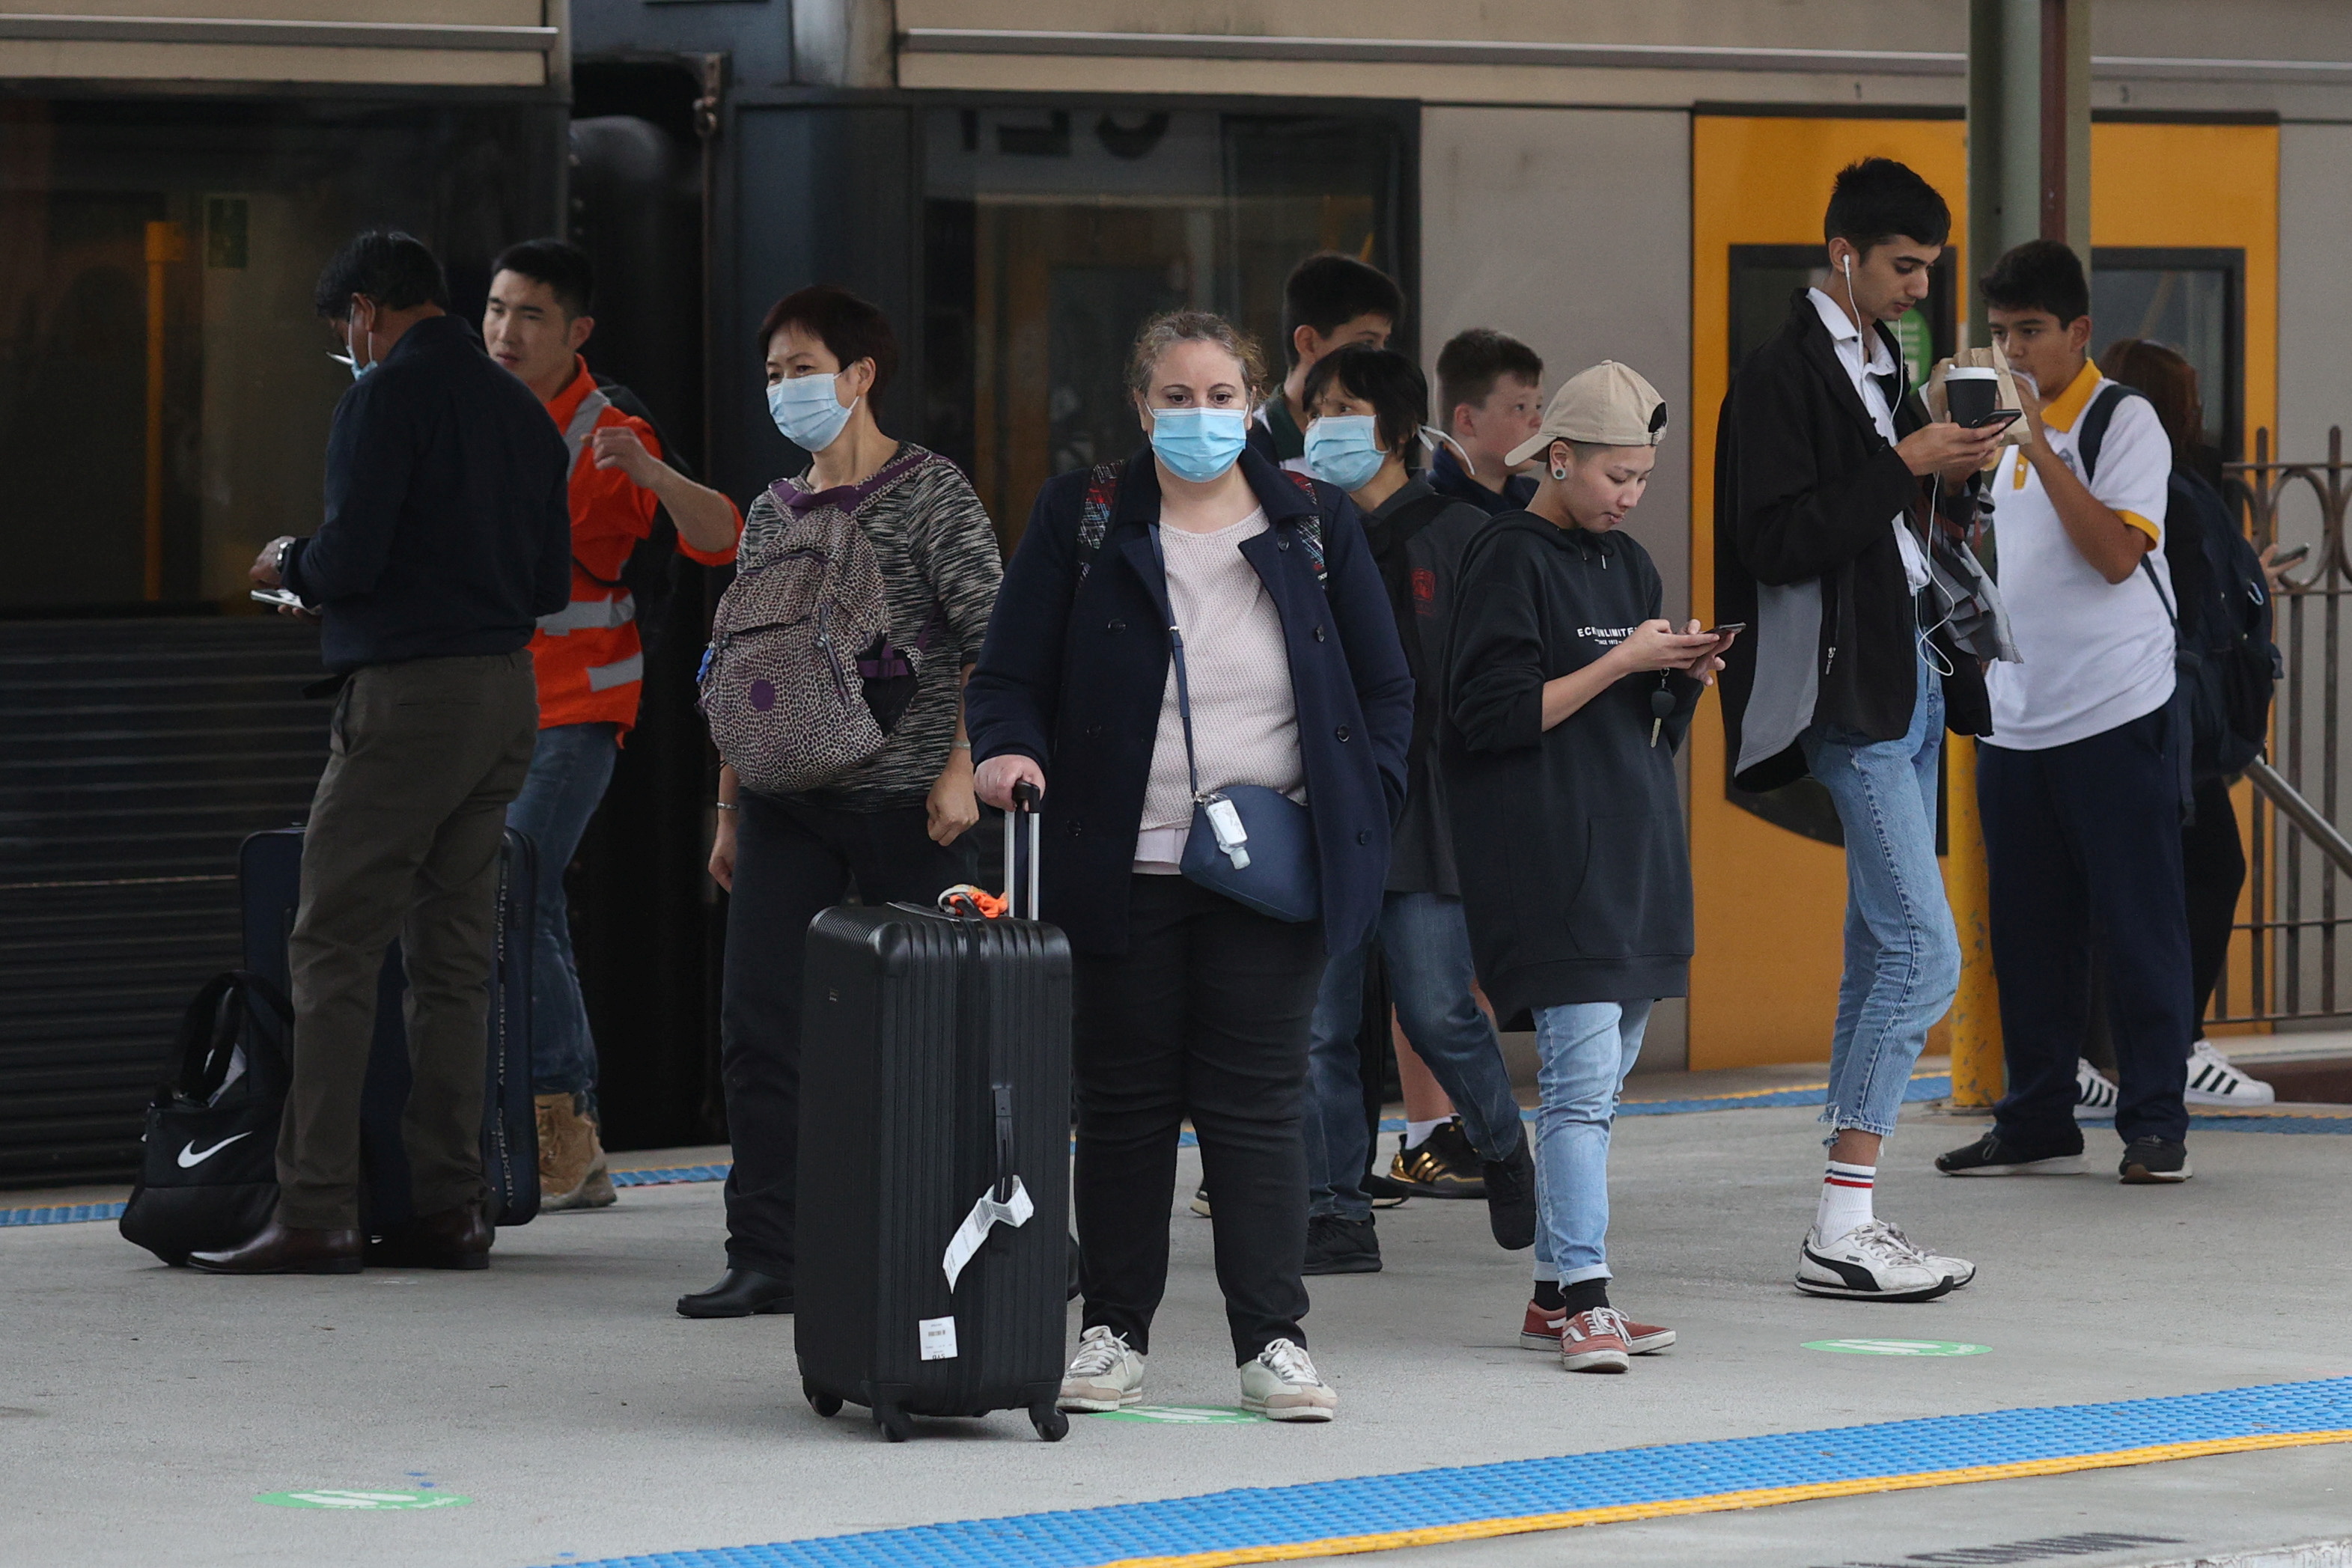 People wear protective masks after new cases of COVID-19 were reported in Sydney